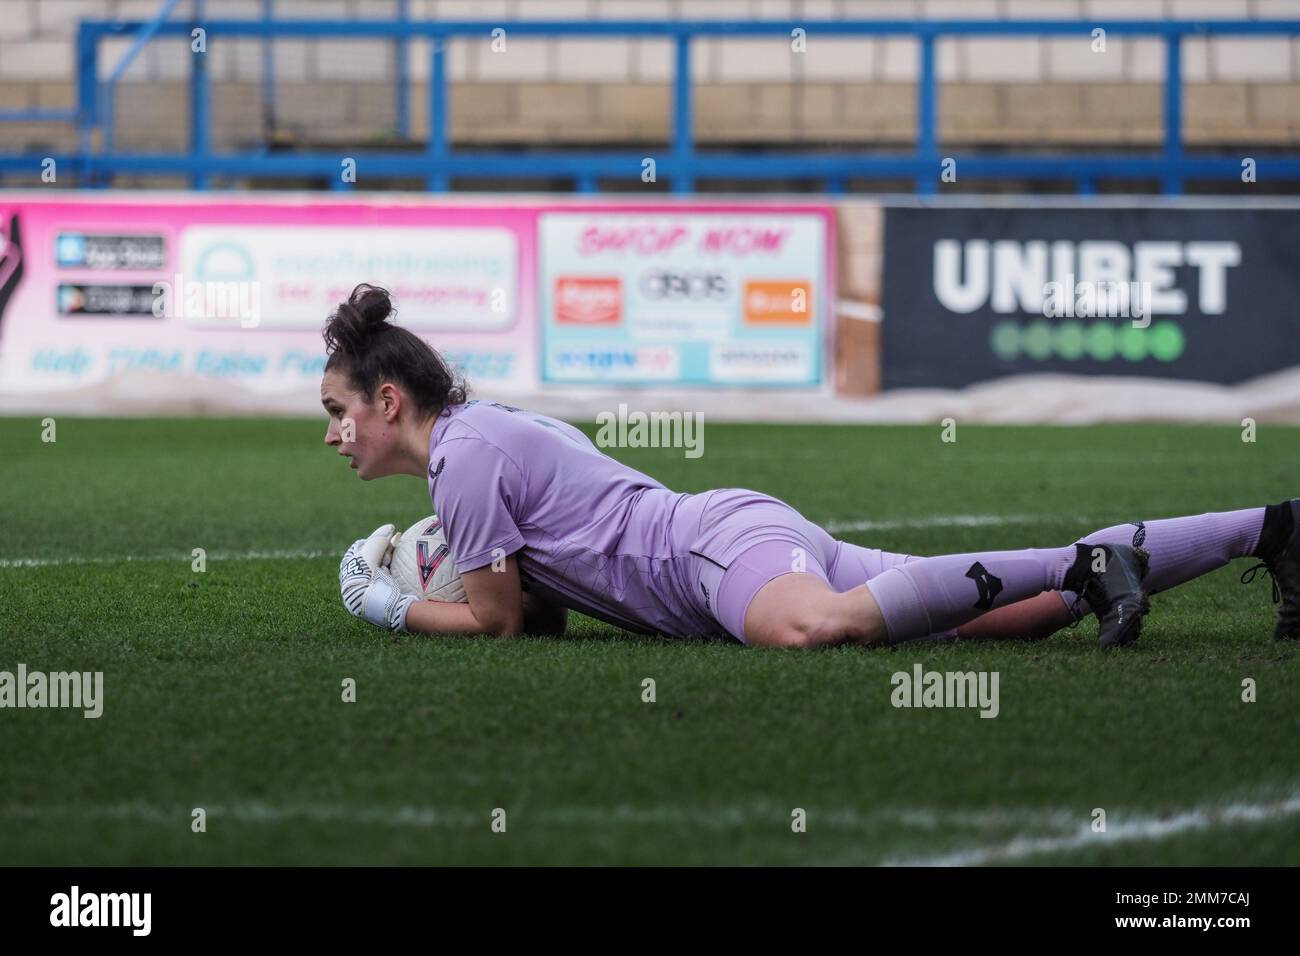 Telford, UK. 29th Jan, 2023. Telford, England, January 29th 2023: Goalkeeper Shan Turner (1 Wolverhampton Wanderers) keeps ahold of the ball during the Womens FA Cup game between Wolverhampton Wanderers and West Ham United at New Bucks Head in Telford, England (Natalie Mincher/SPP) Credit: SPP Sport Press Photo. /Alamy Live News Stock Photo